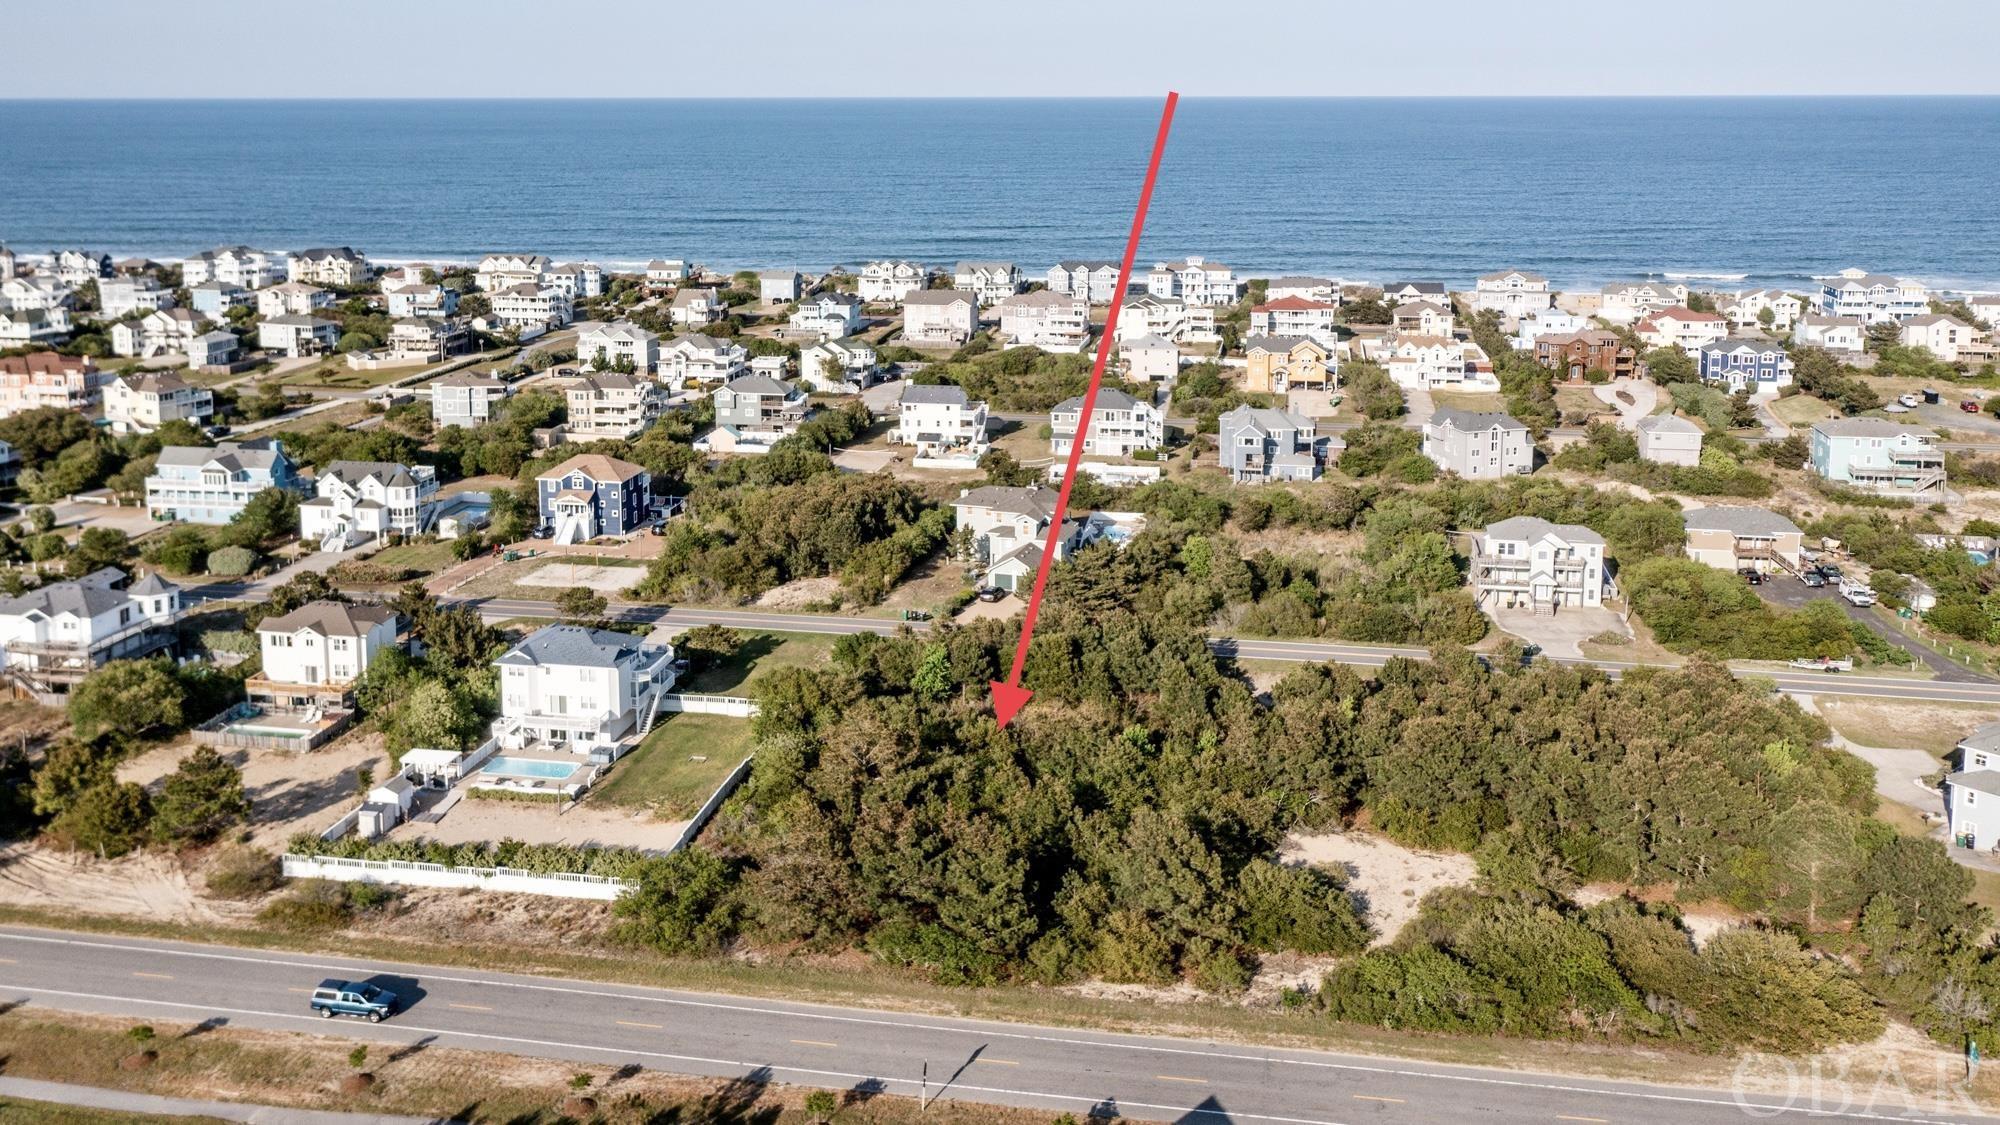 nice 6th row homesite, will accommodate a large rental machine, easy access to the beach and 2 shopping centers, easy walk to the coffee shop